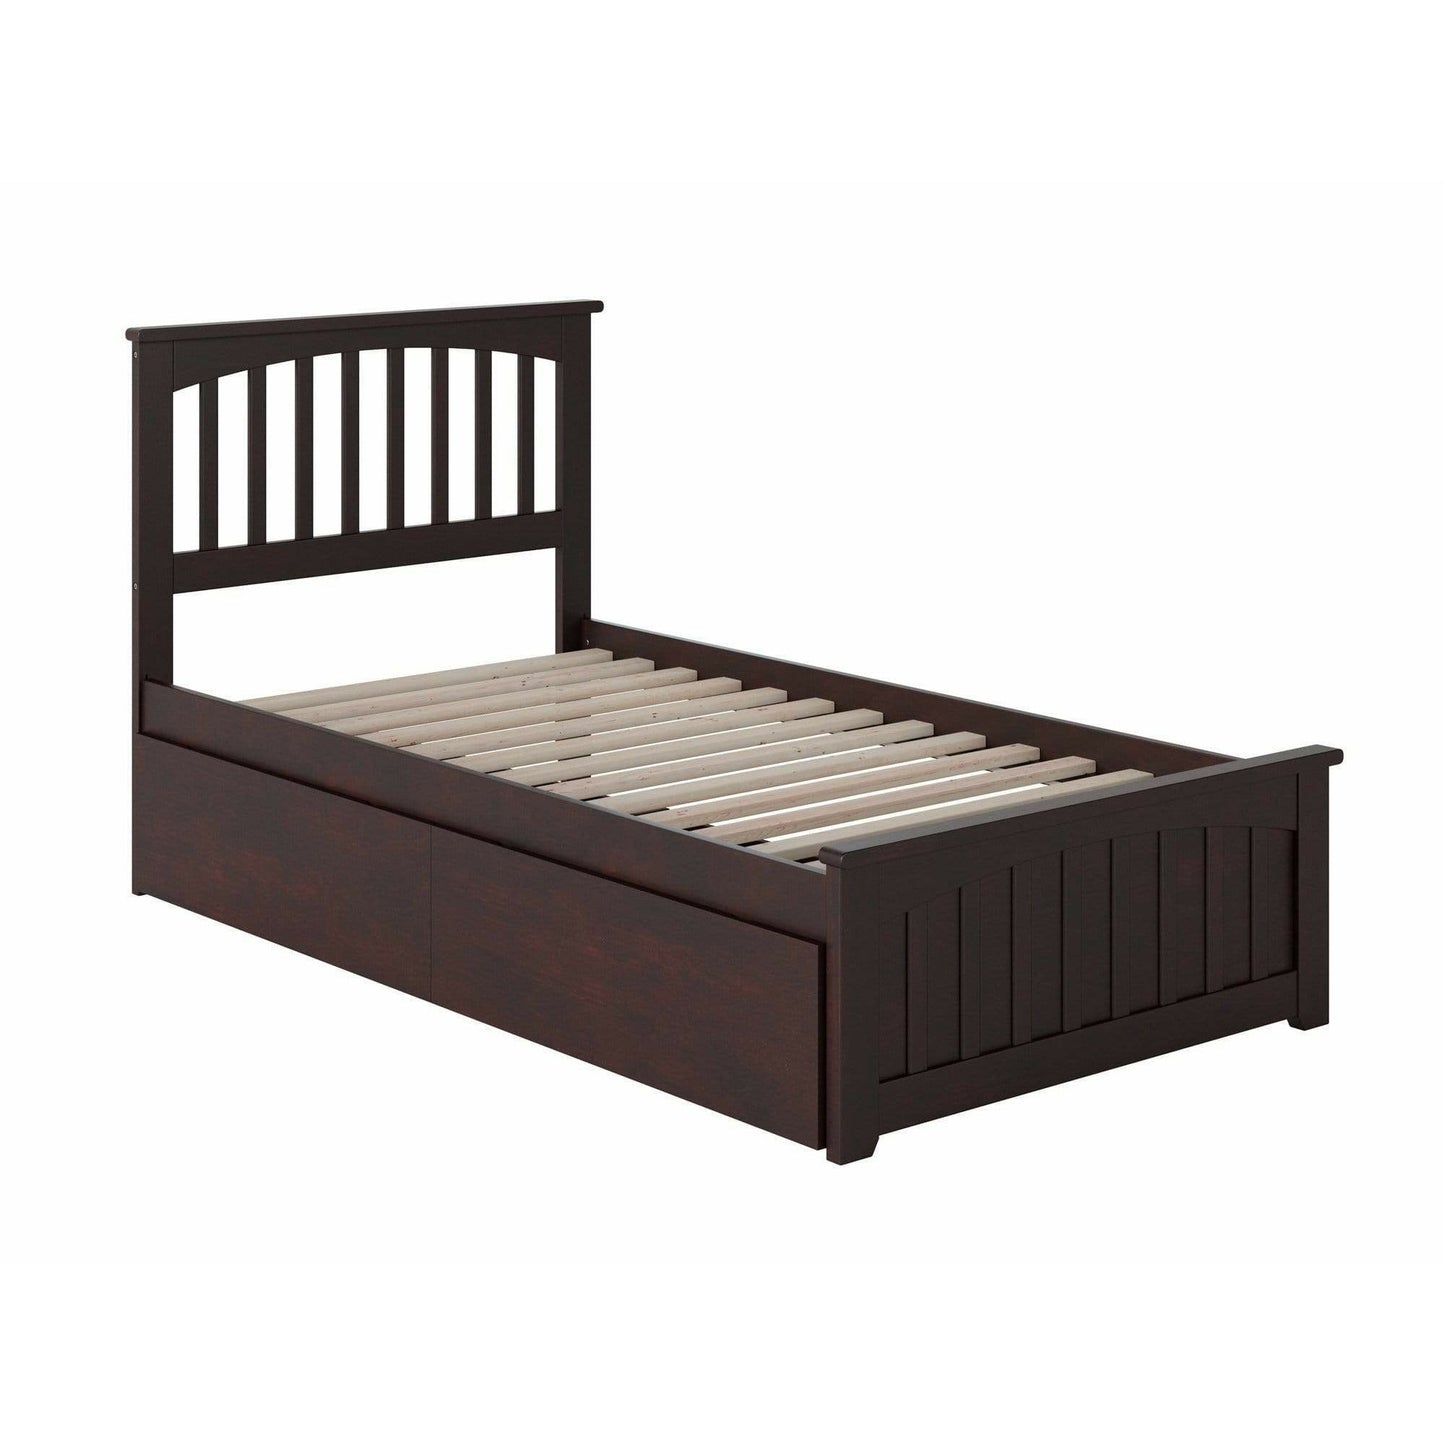 Atlantic Furniture Bed Mission Twin Platform Bed with Matching Foot Board with 2 Urban Bed Drawers in Espresso